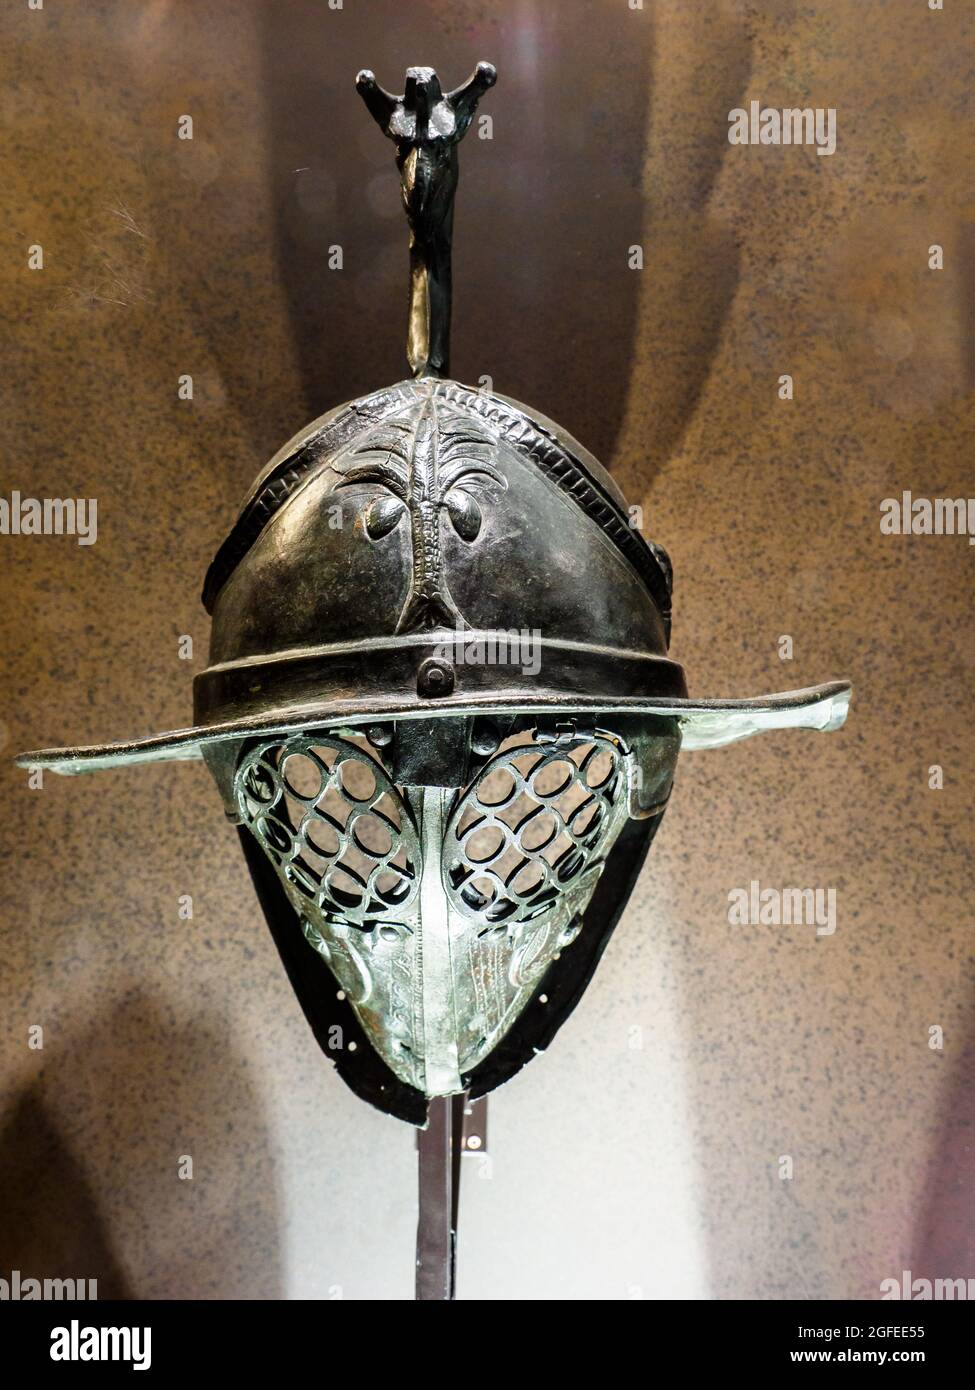 Tracian gladiator's bronze helmet with depiction of a palm tree- Gladiatorial barracks, Pompeii first half of the 1st century AD Stock Photo